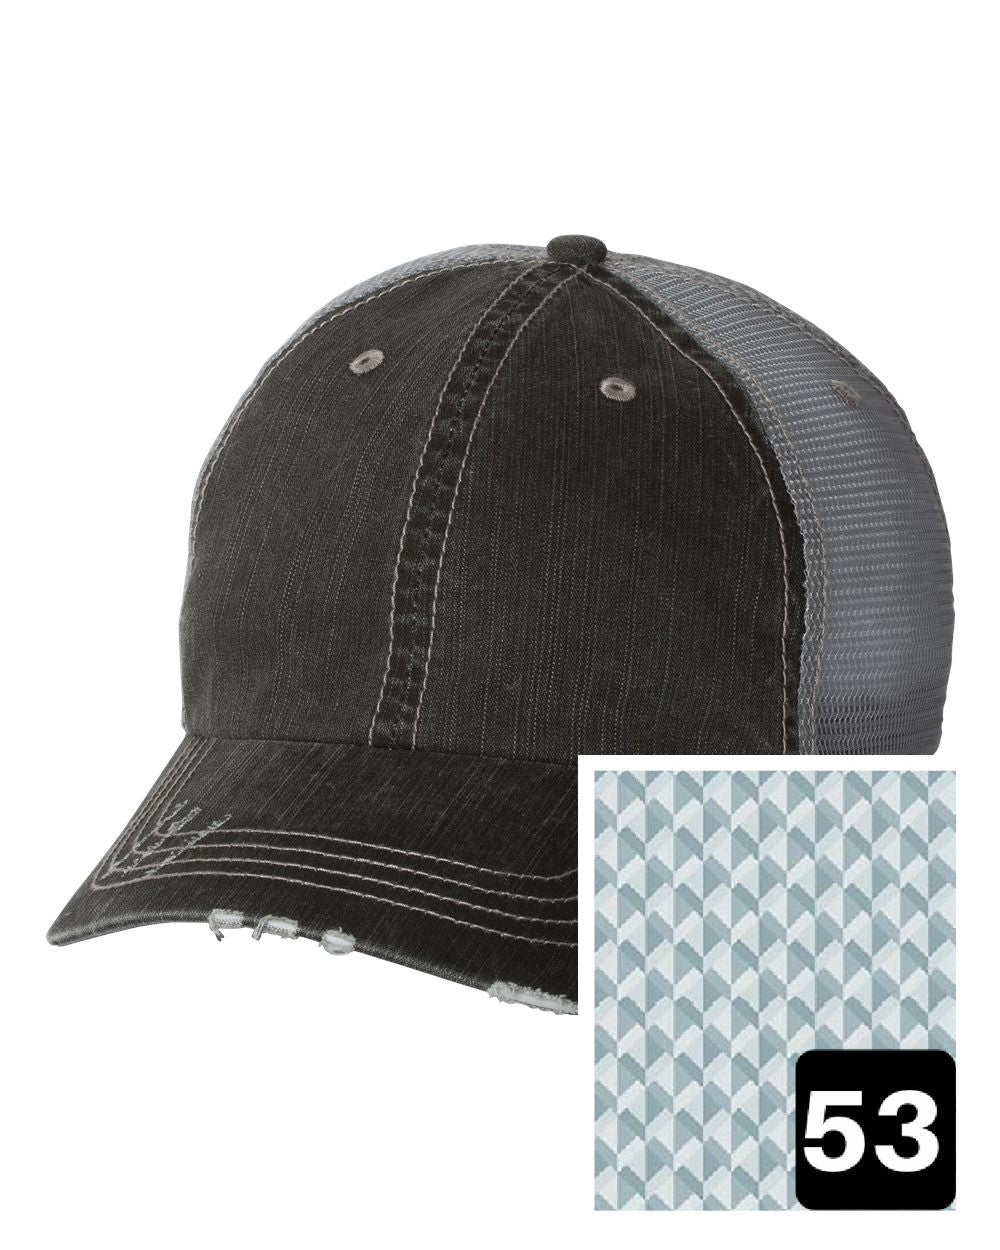 gray distressed trucker hat with multi-color stripe fabric state of Alaska